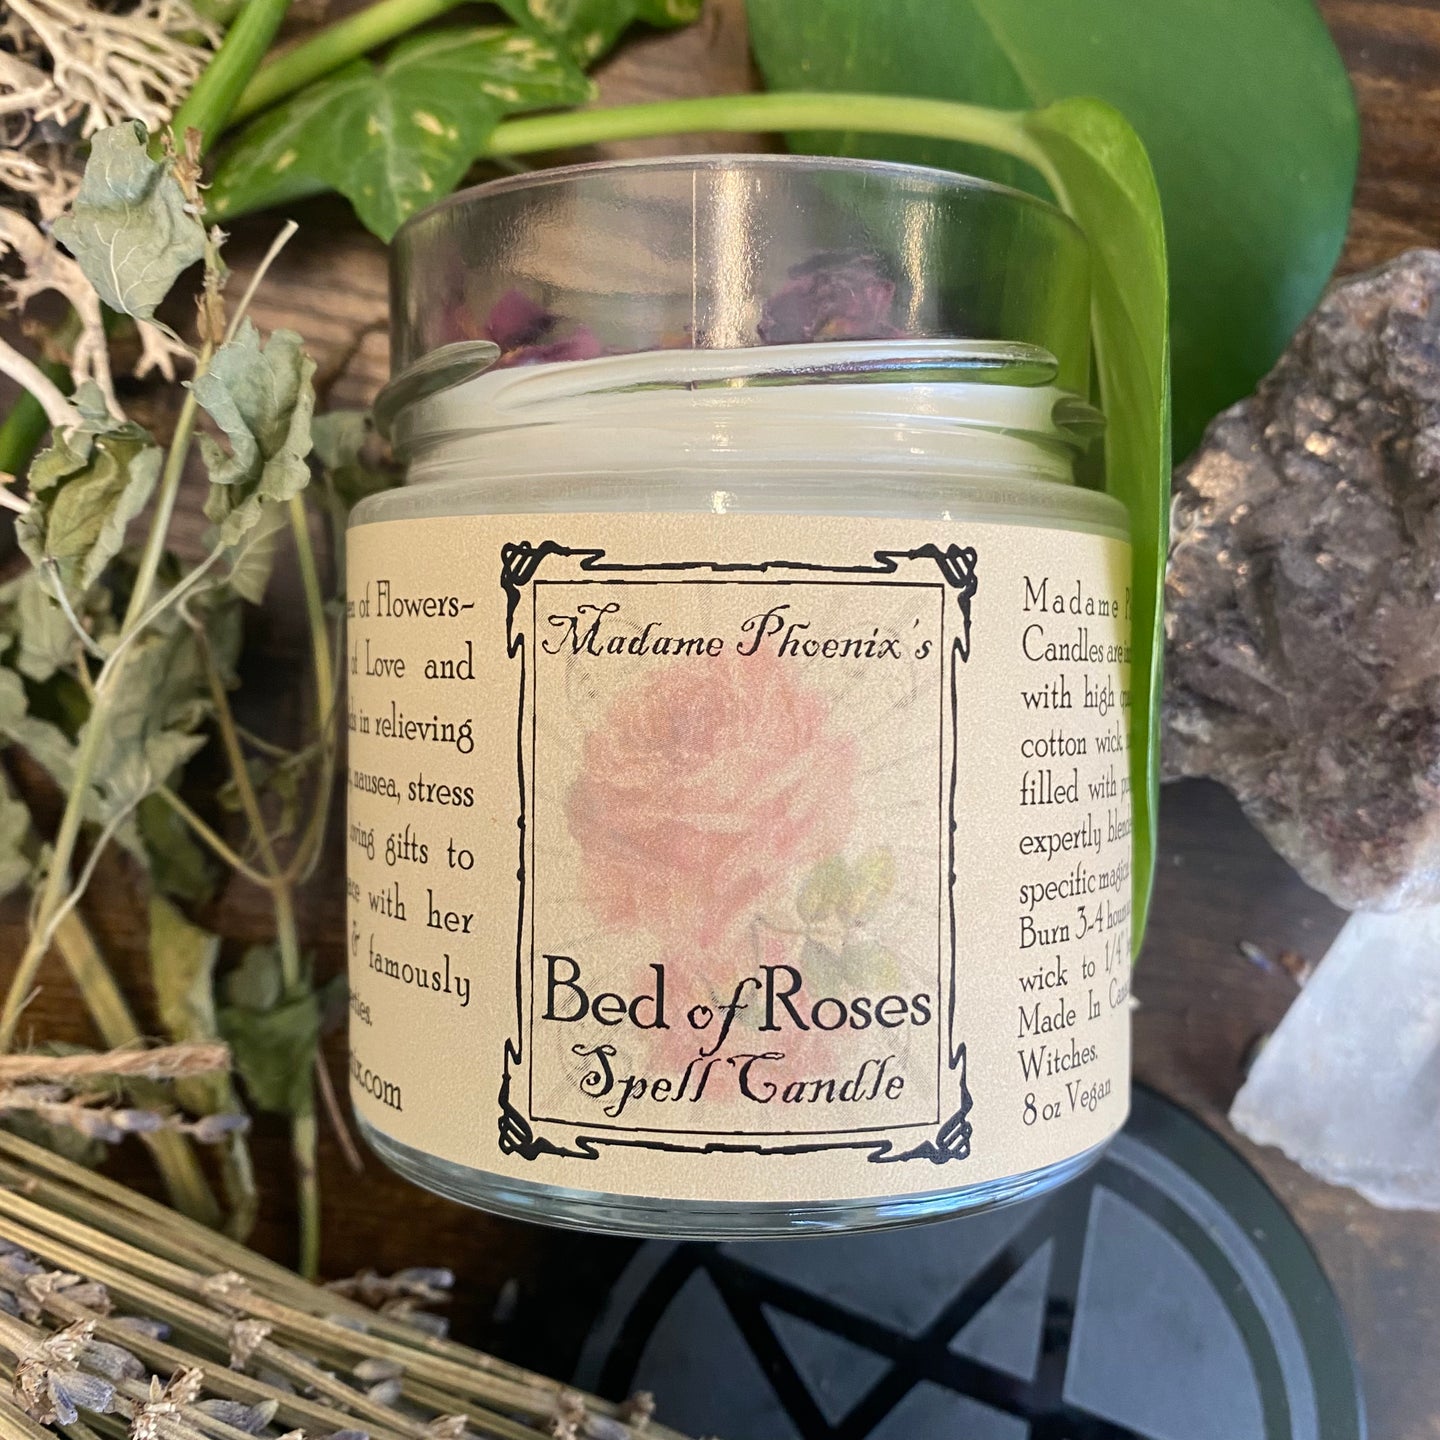 Bed of Roses Spell Candle